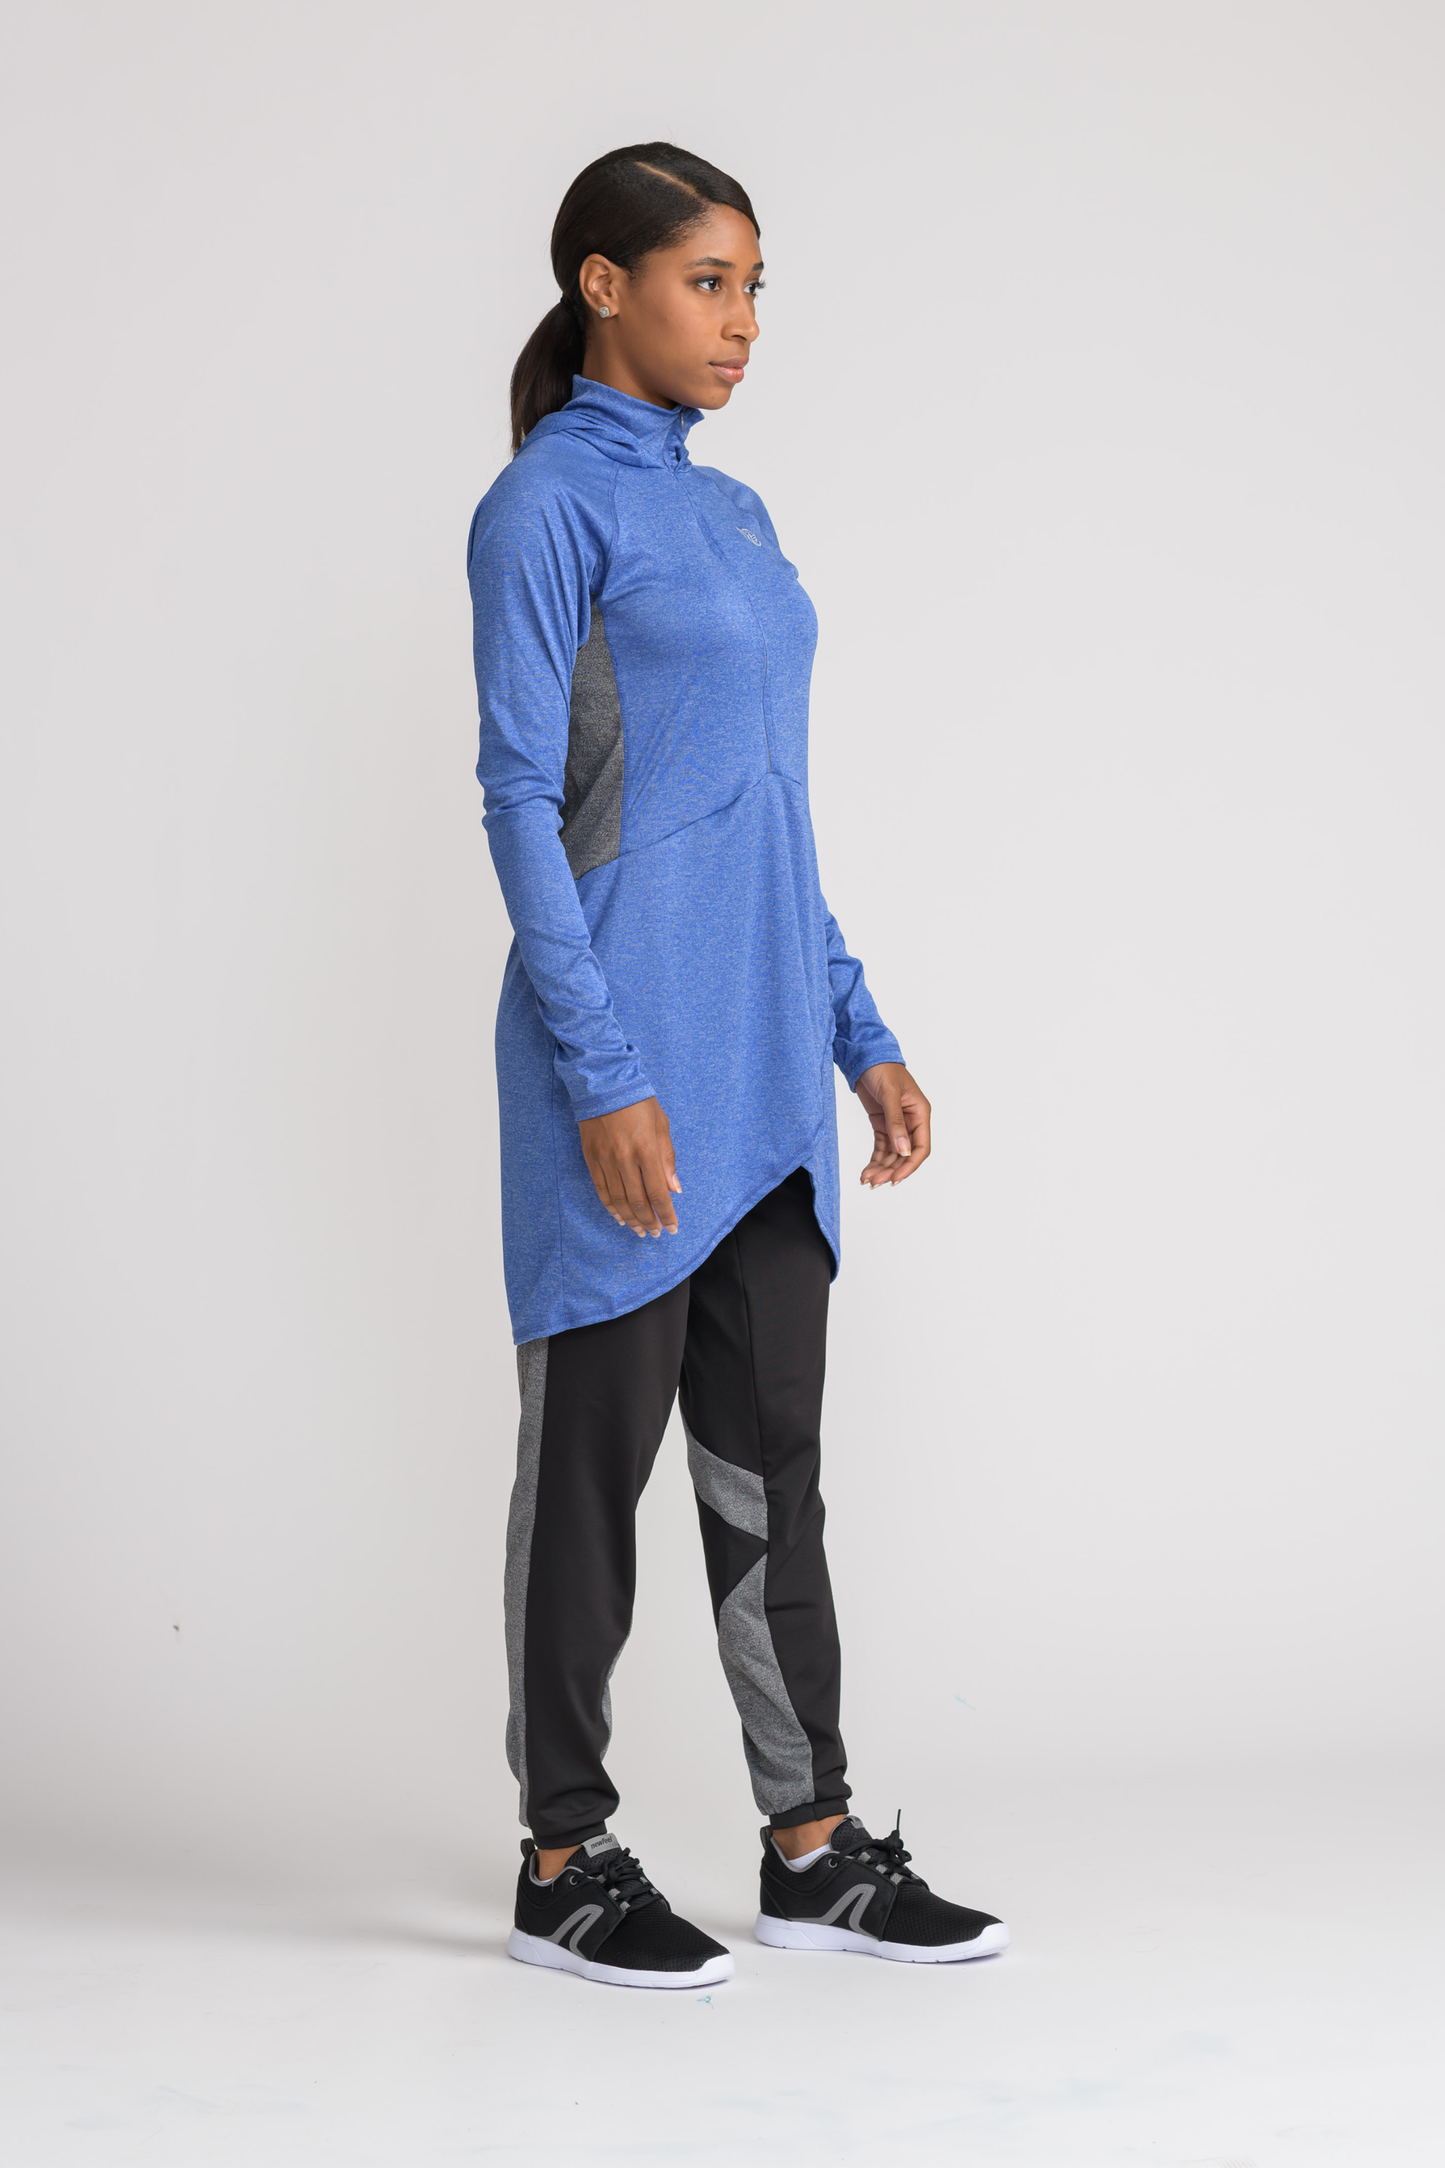 Performance Tech Top - Blue - sportswear tops - Dignitii Activewear - Third Culture Boutique